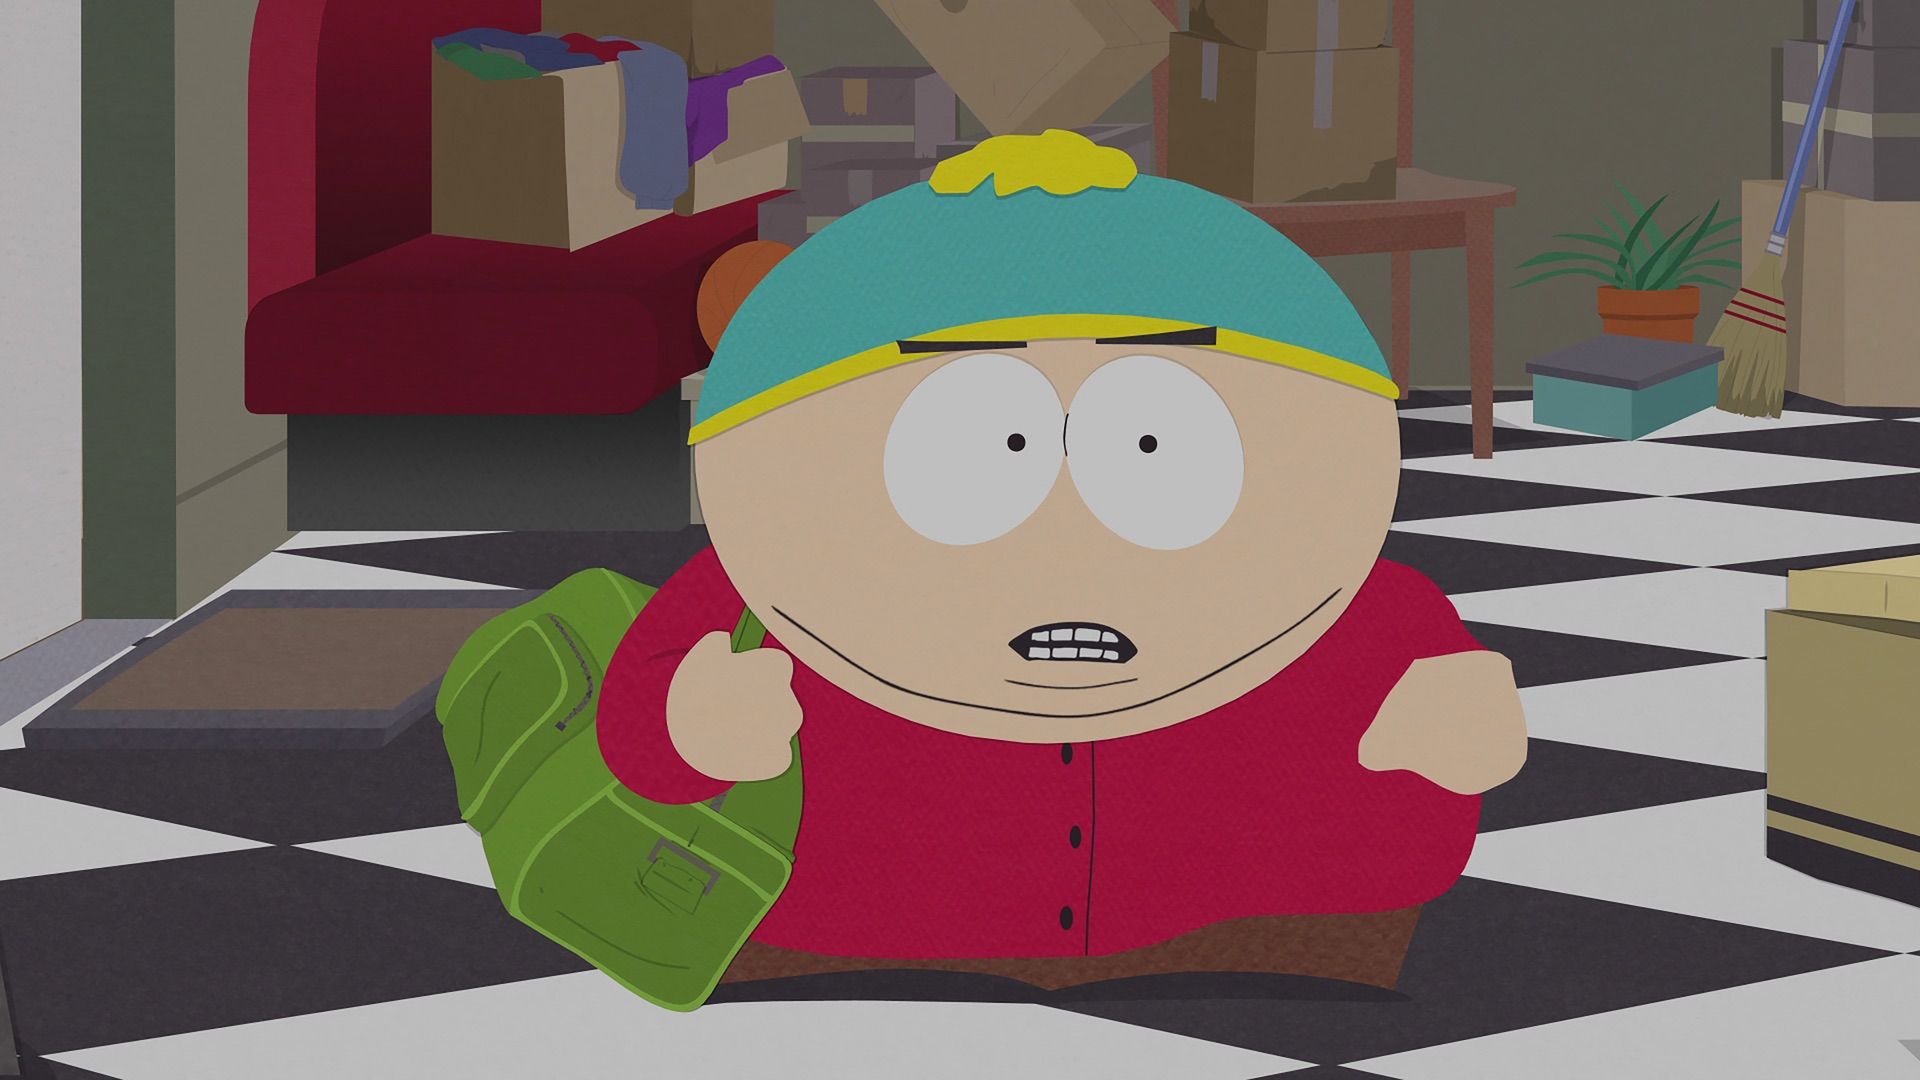 South Park the Streaming Wars Part 2 • FlixPatrol